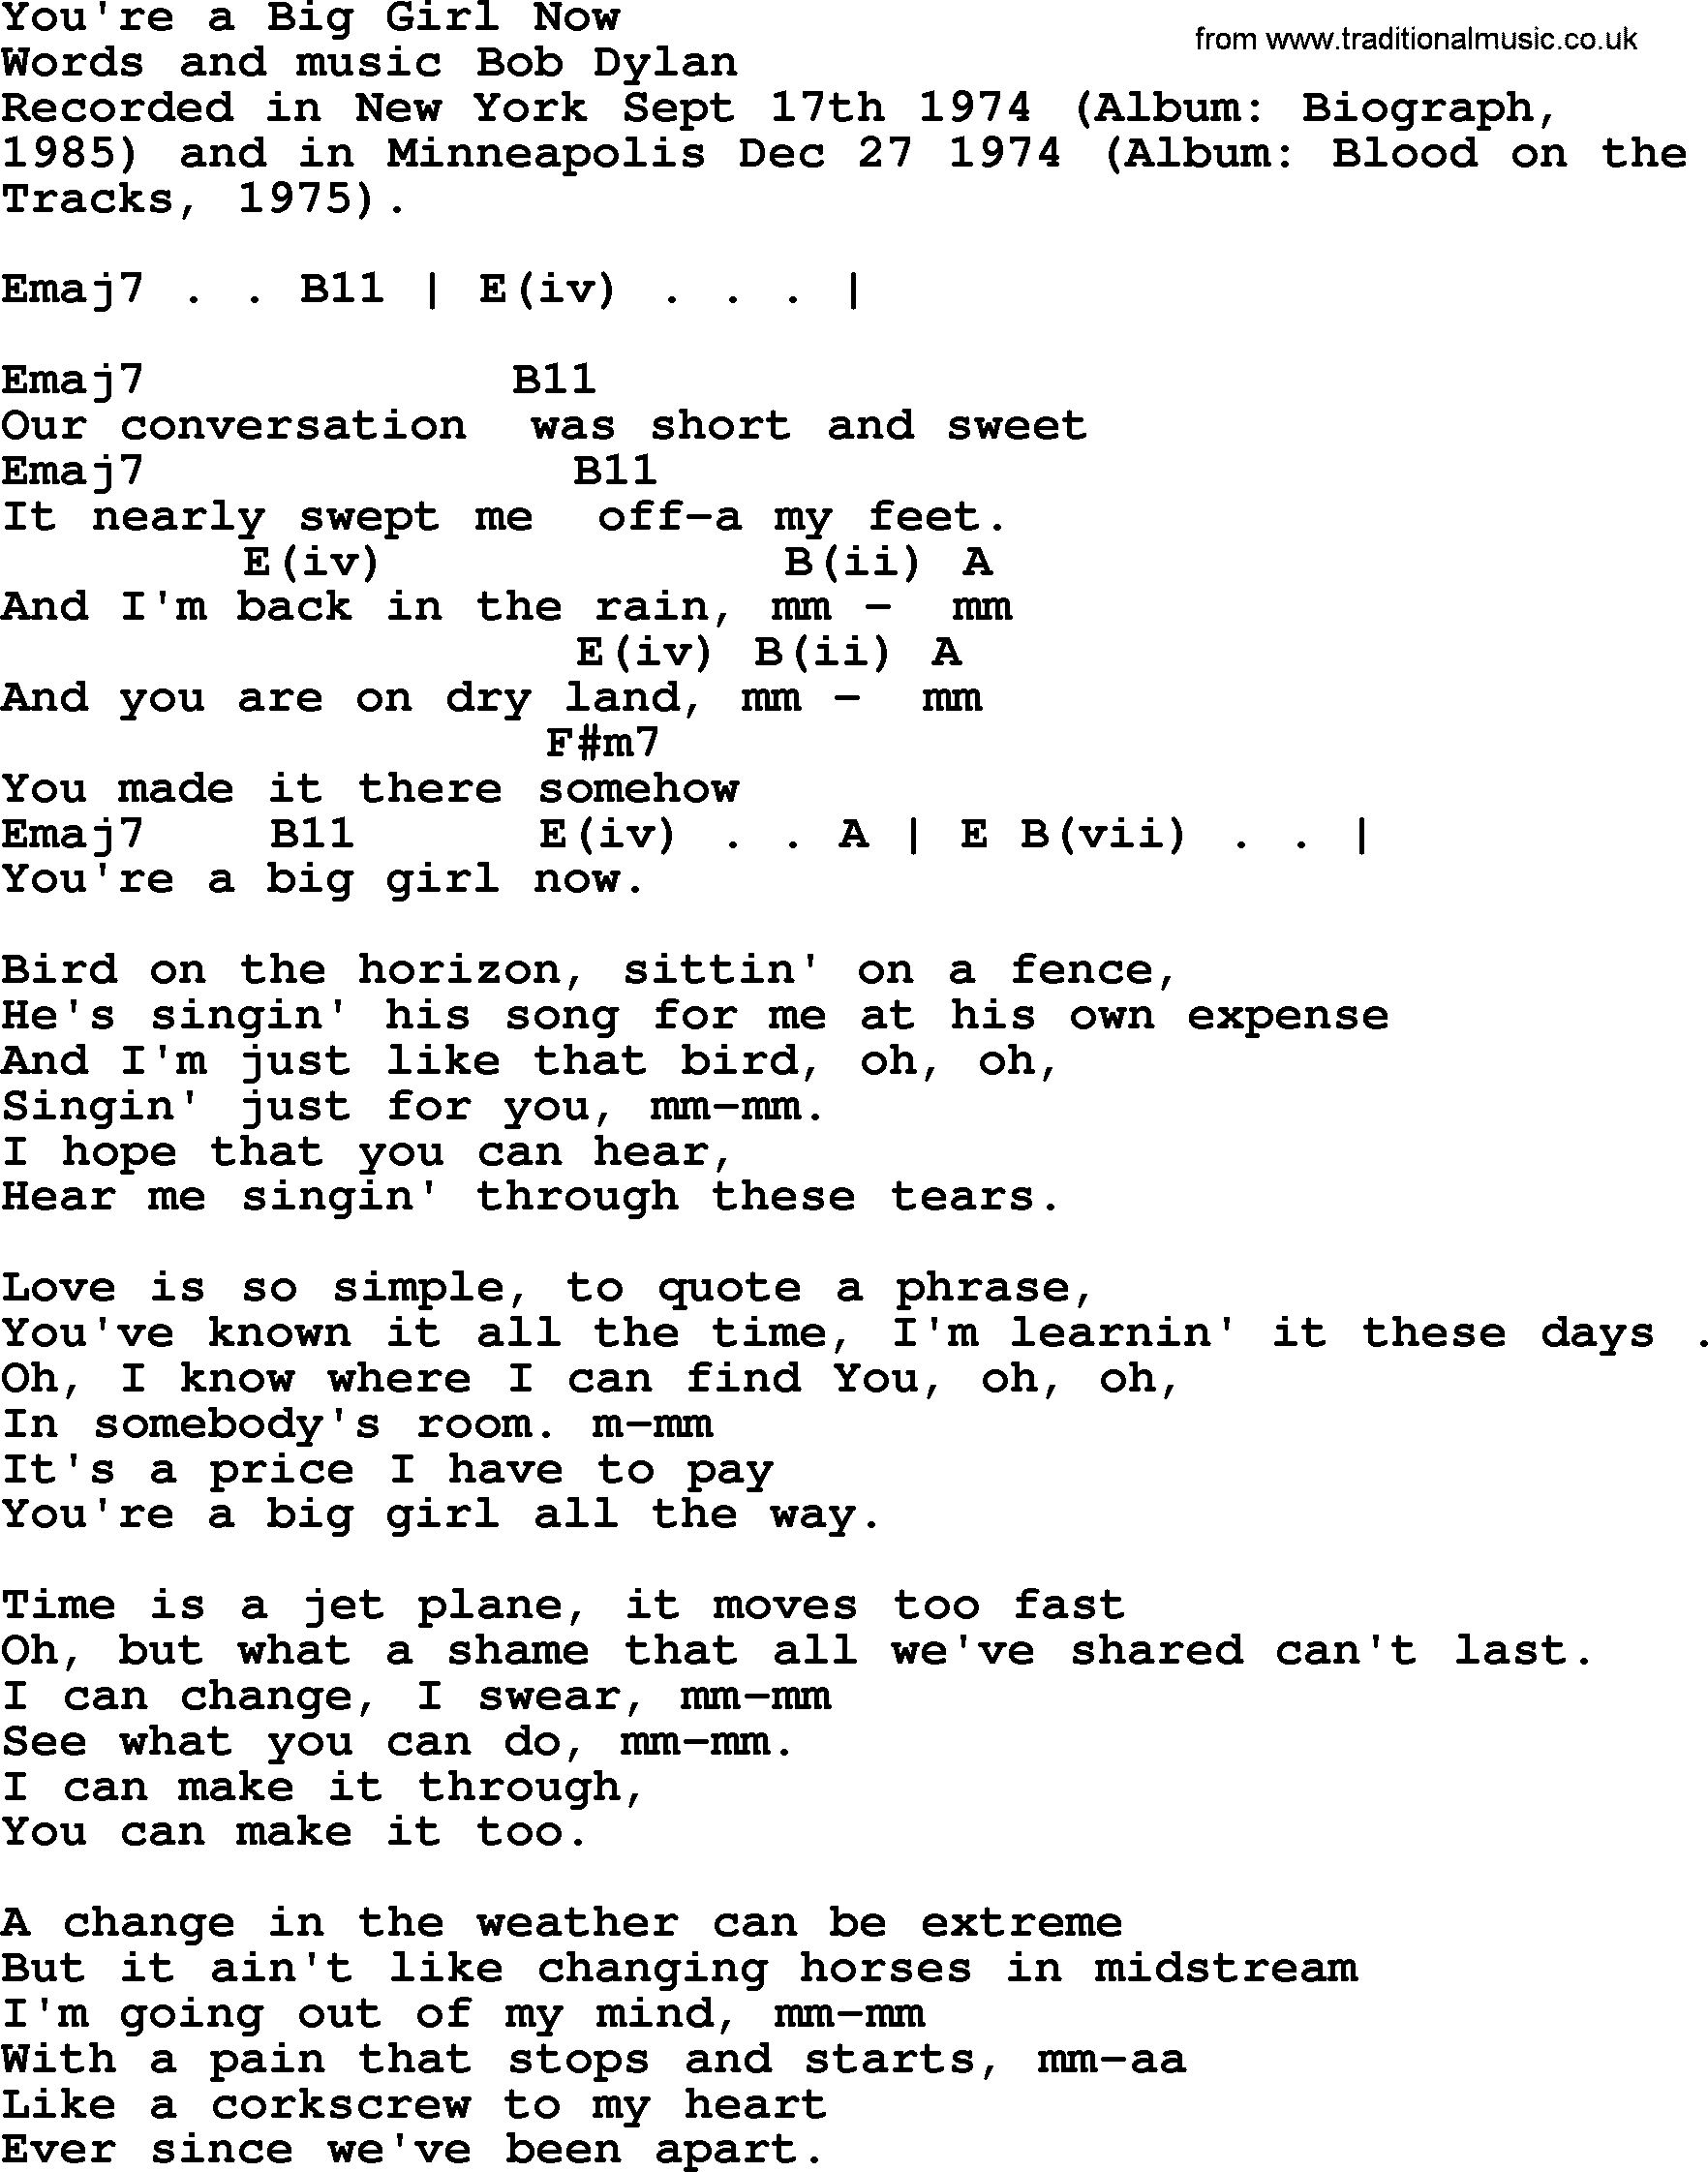 Bob Dylan song, lyrics with chords - You're a Big Girl Now